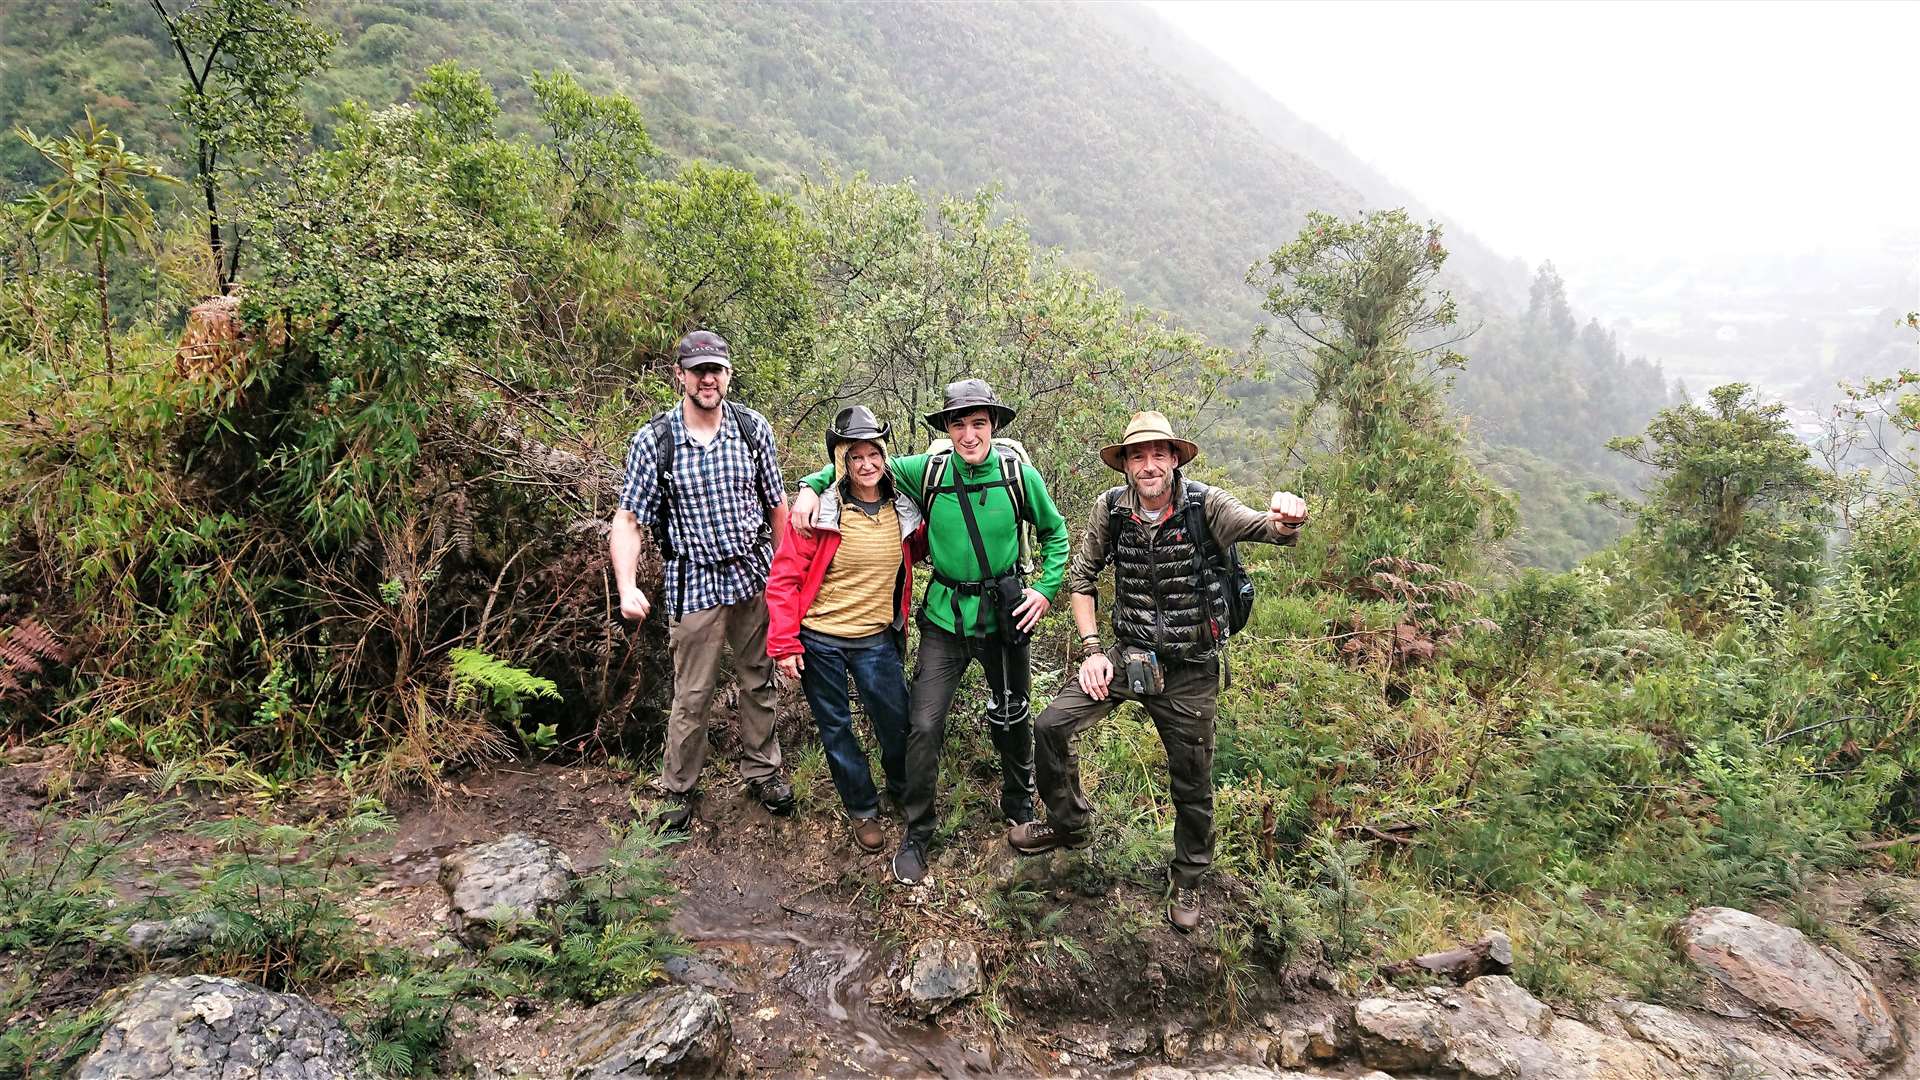 From left, Noah Wendrich, Walter Payne, Lori Umberg, Ashley Cowie on a previous expedition.